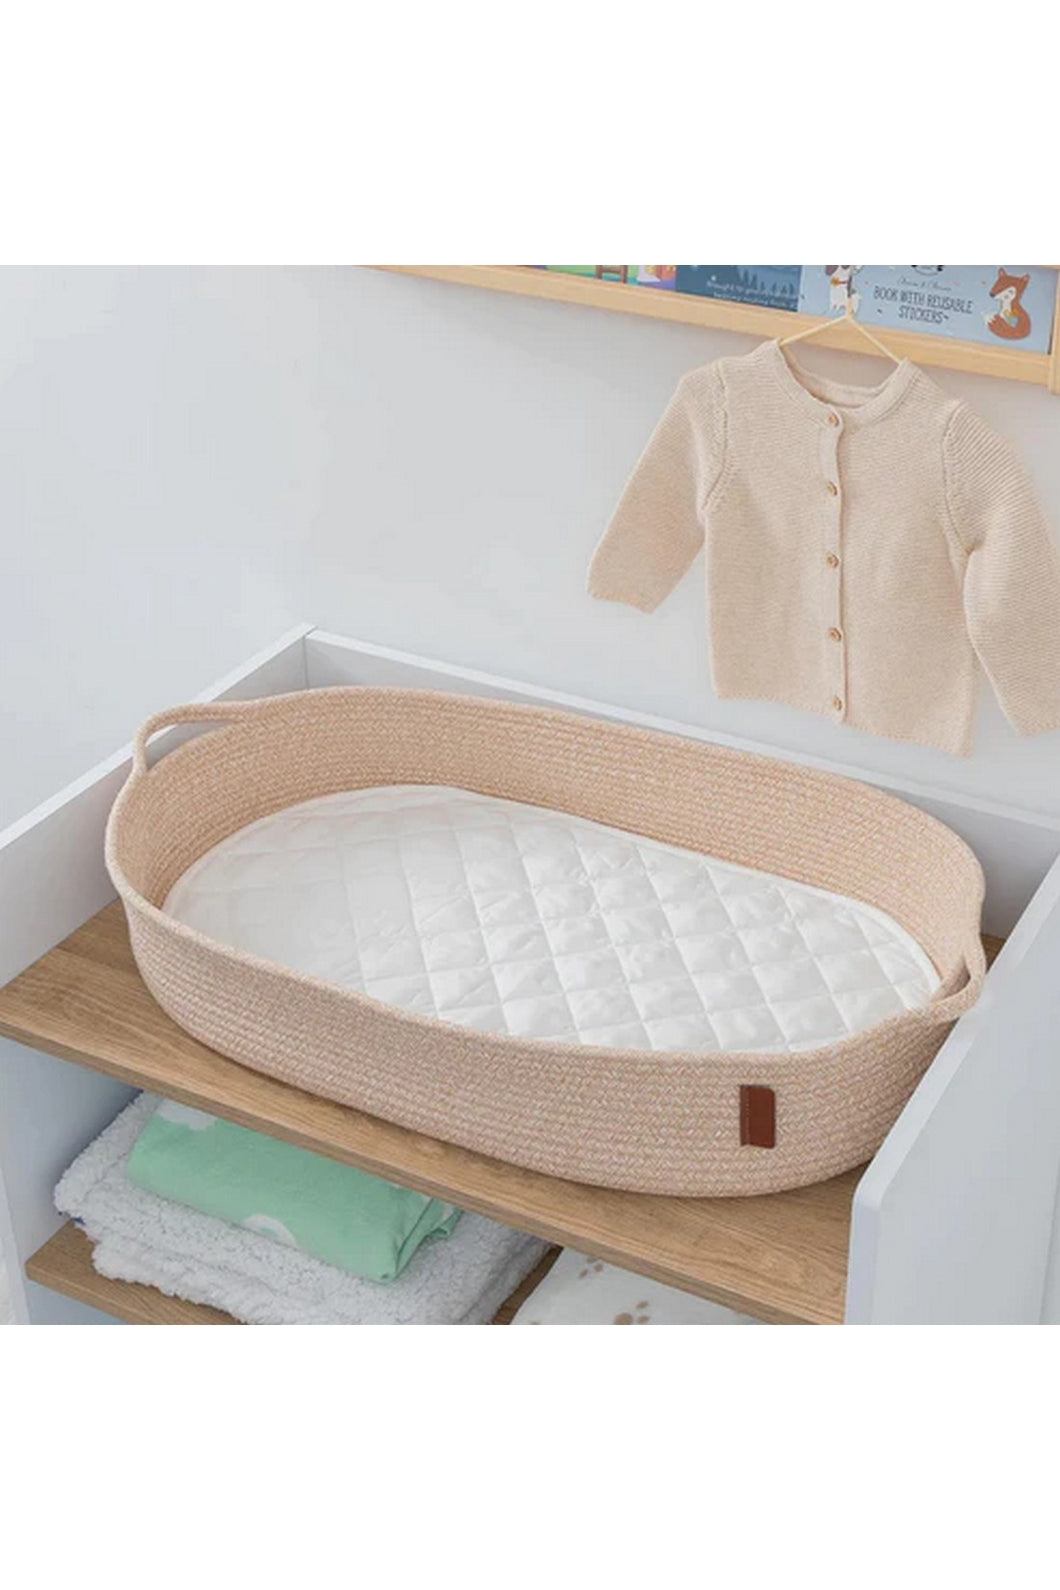 Clevamama Changing Basket & Quilted Mat